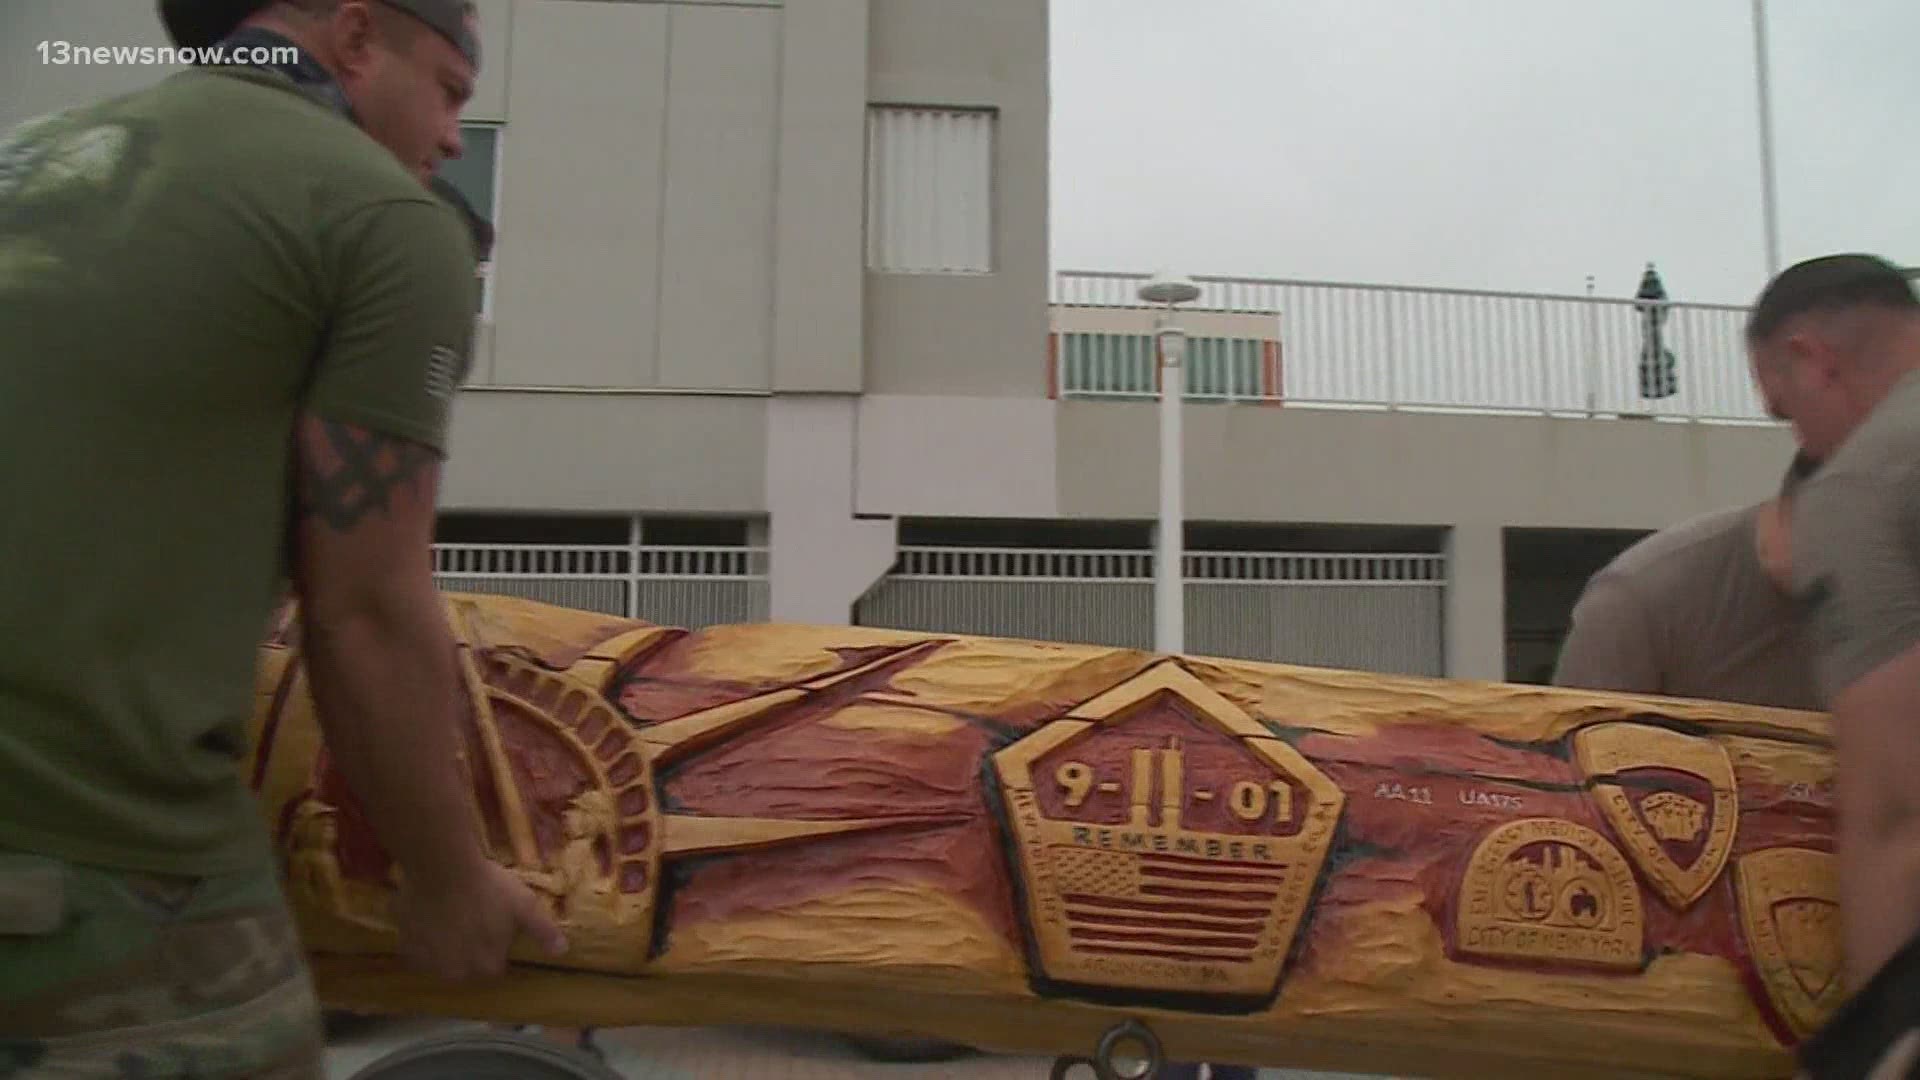 The 700-lb log features several designs to commemorate the lives lost in the 9/11 terror attacks.